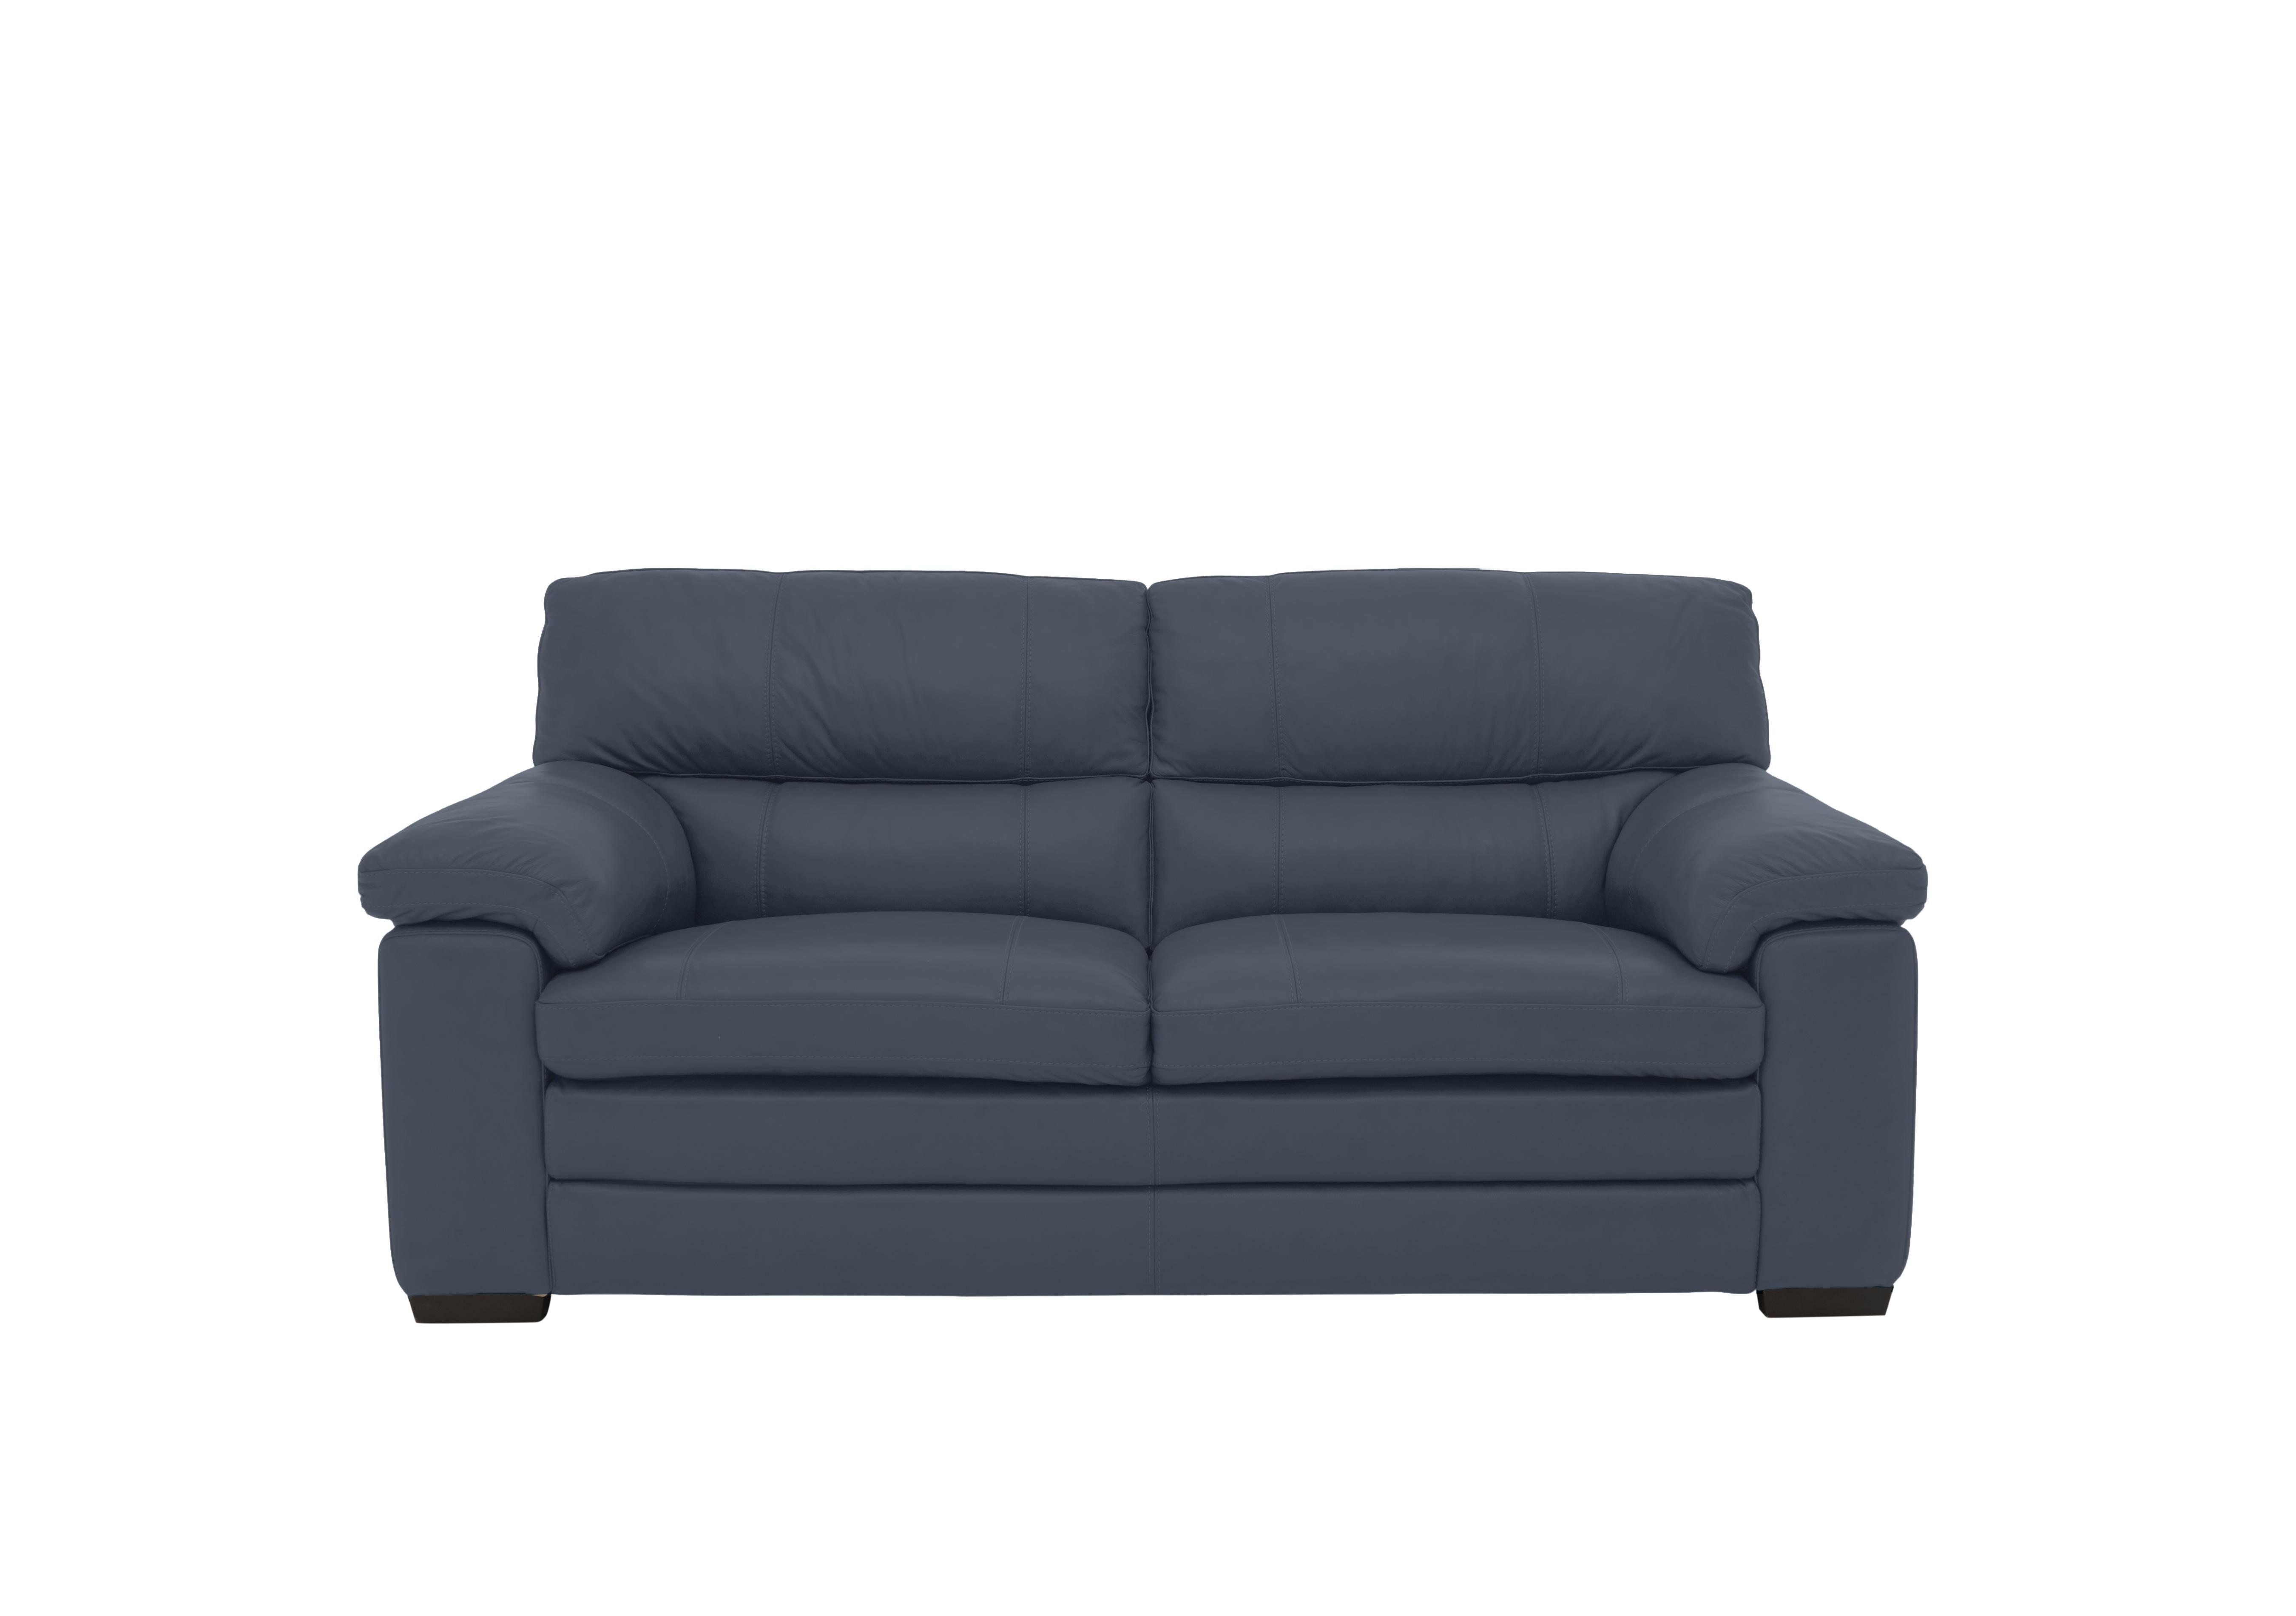 Cozee 2 Seater Pure Premium Leather Sofa in Bv-313e Ocean Blue on Furniture Village